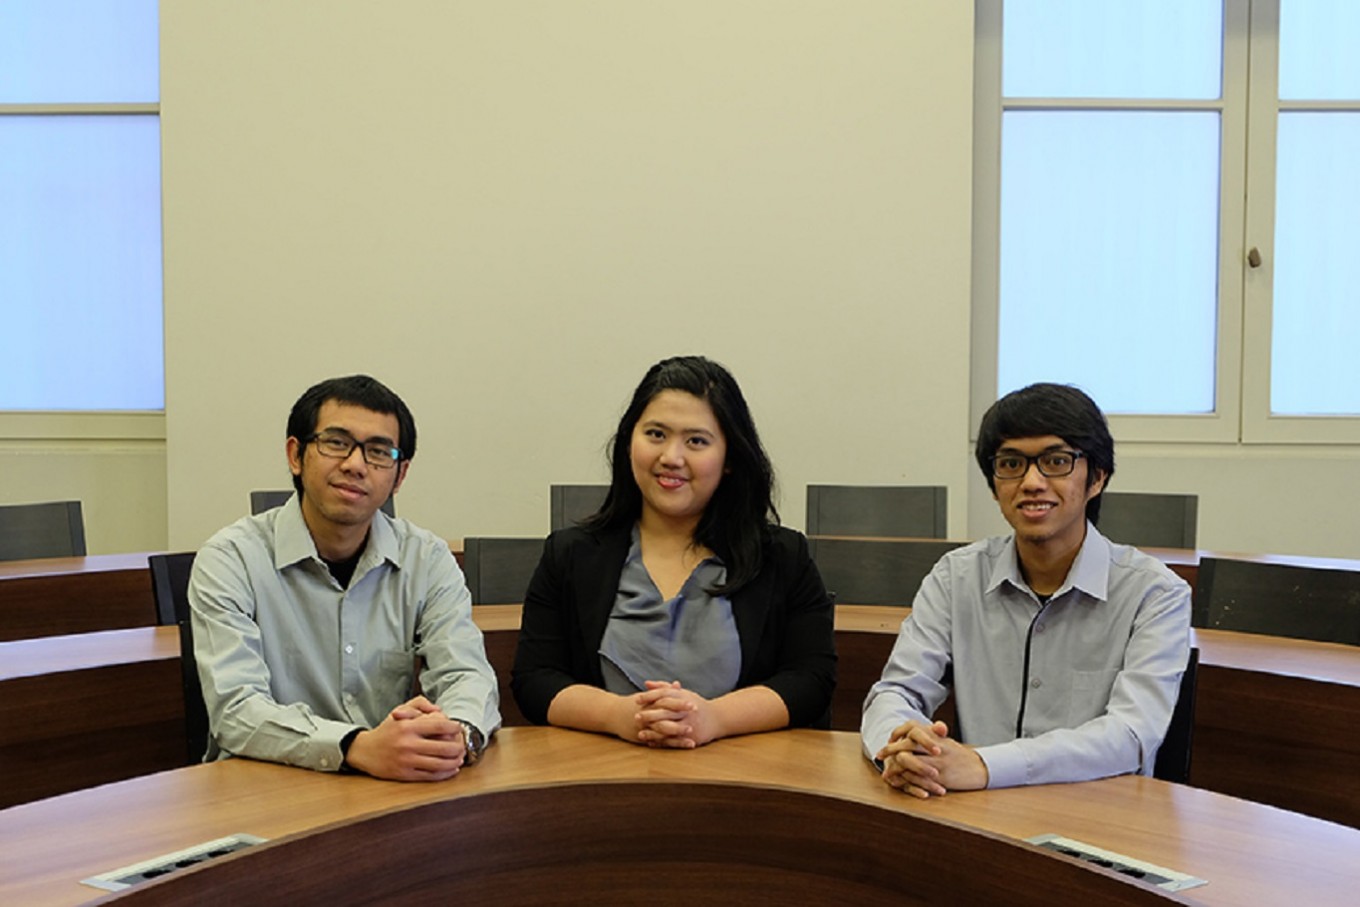 Indonesian students selected as finalists in Airbus competition